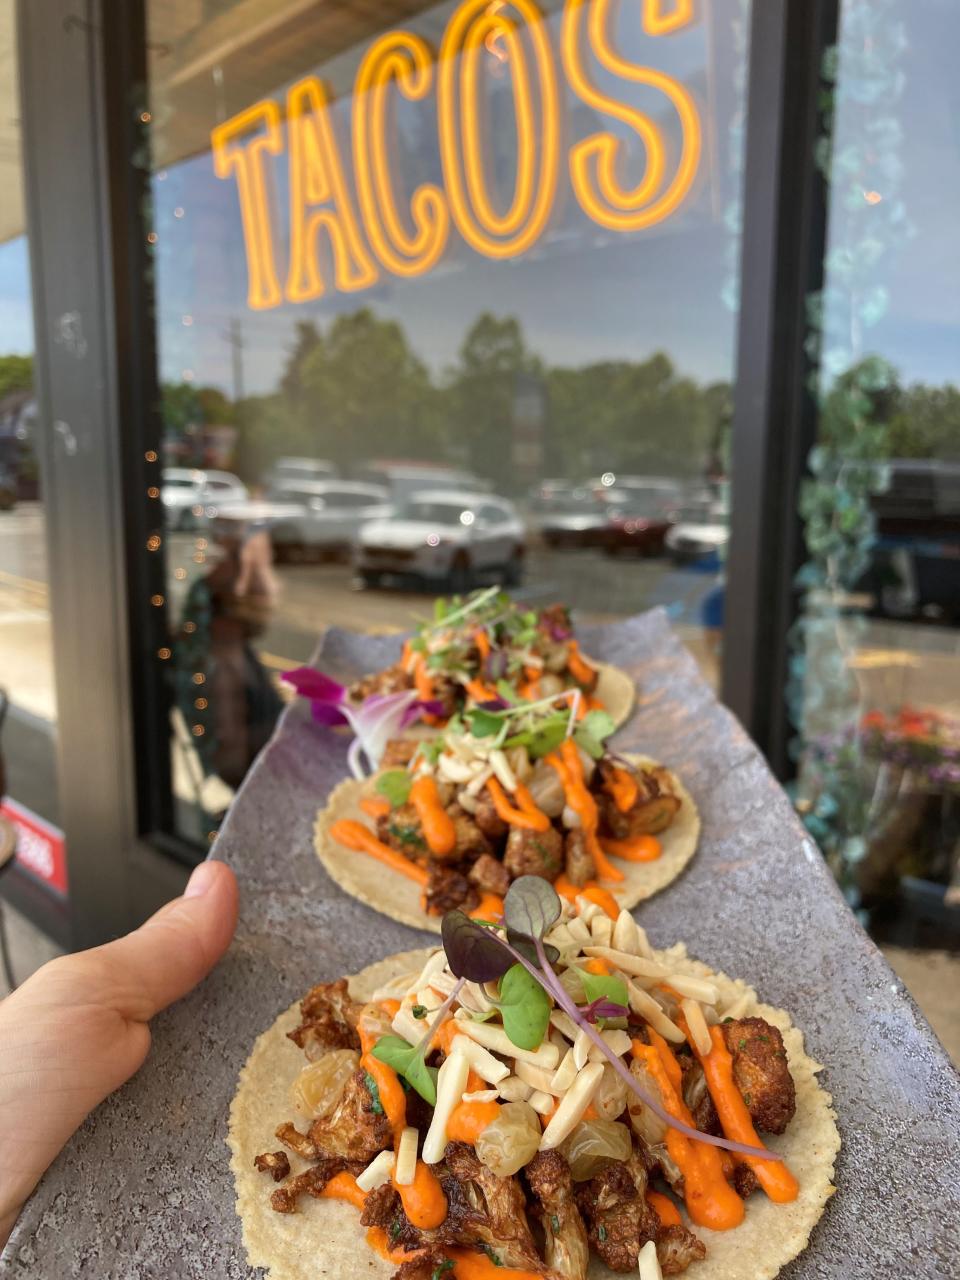 Not your ordinary cauliflower tacos: The ones from Craft Taqueria in New City are made with yogurt and Meyer lemon marinated cauliflower, roasted piquillo pepper romesco, toasted almonds, golden raisins, and fresh herbs.  Photographed June 8, 2022.